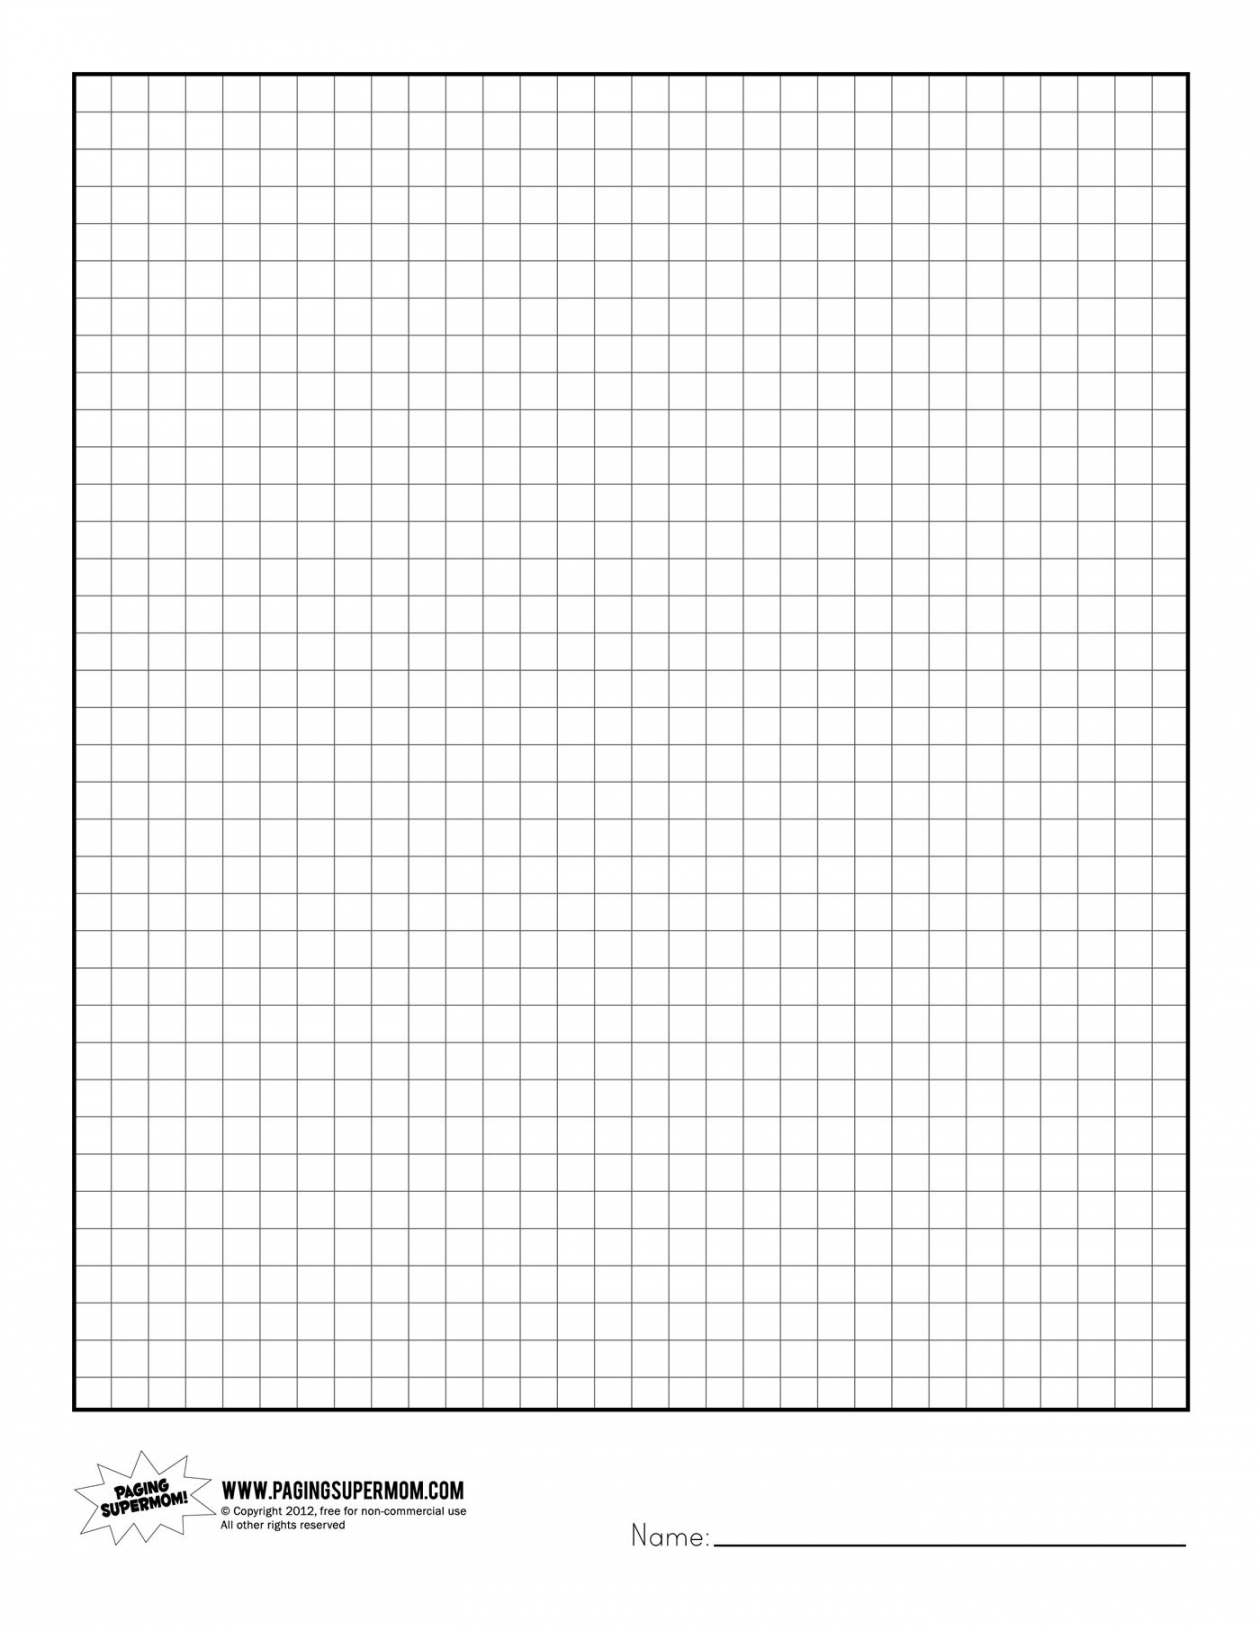 Pin on Healthy eating - FREE Printables - Free Grid Paper